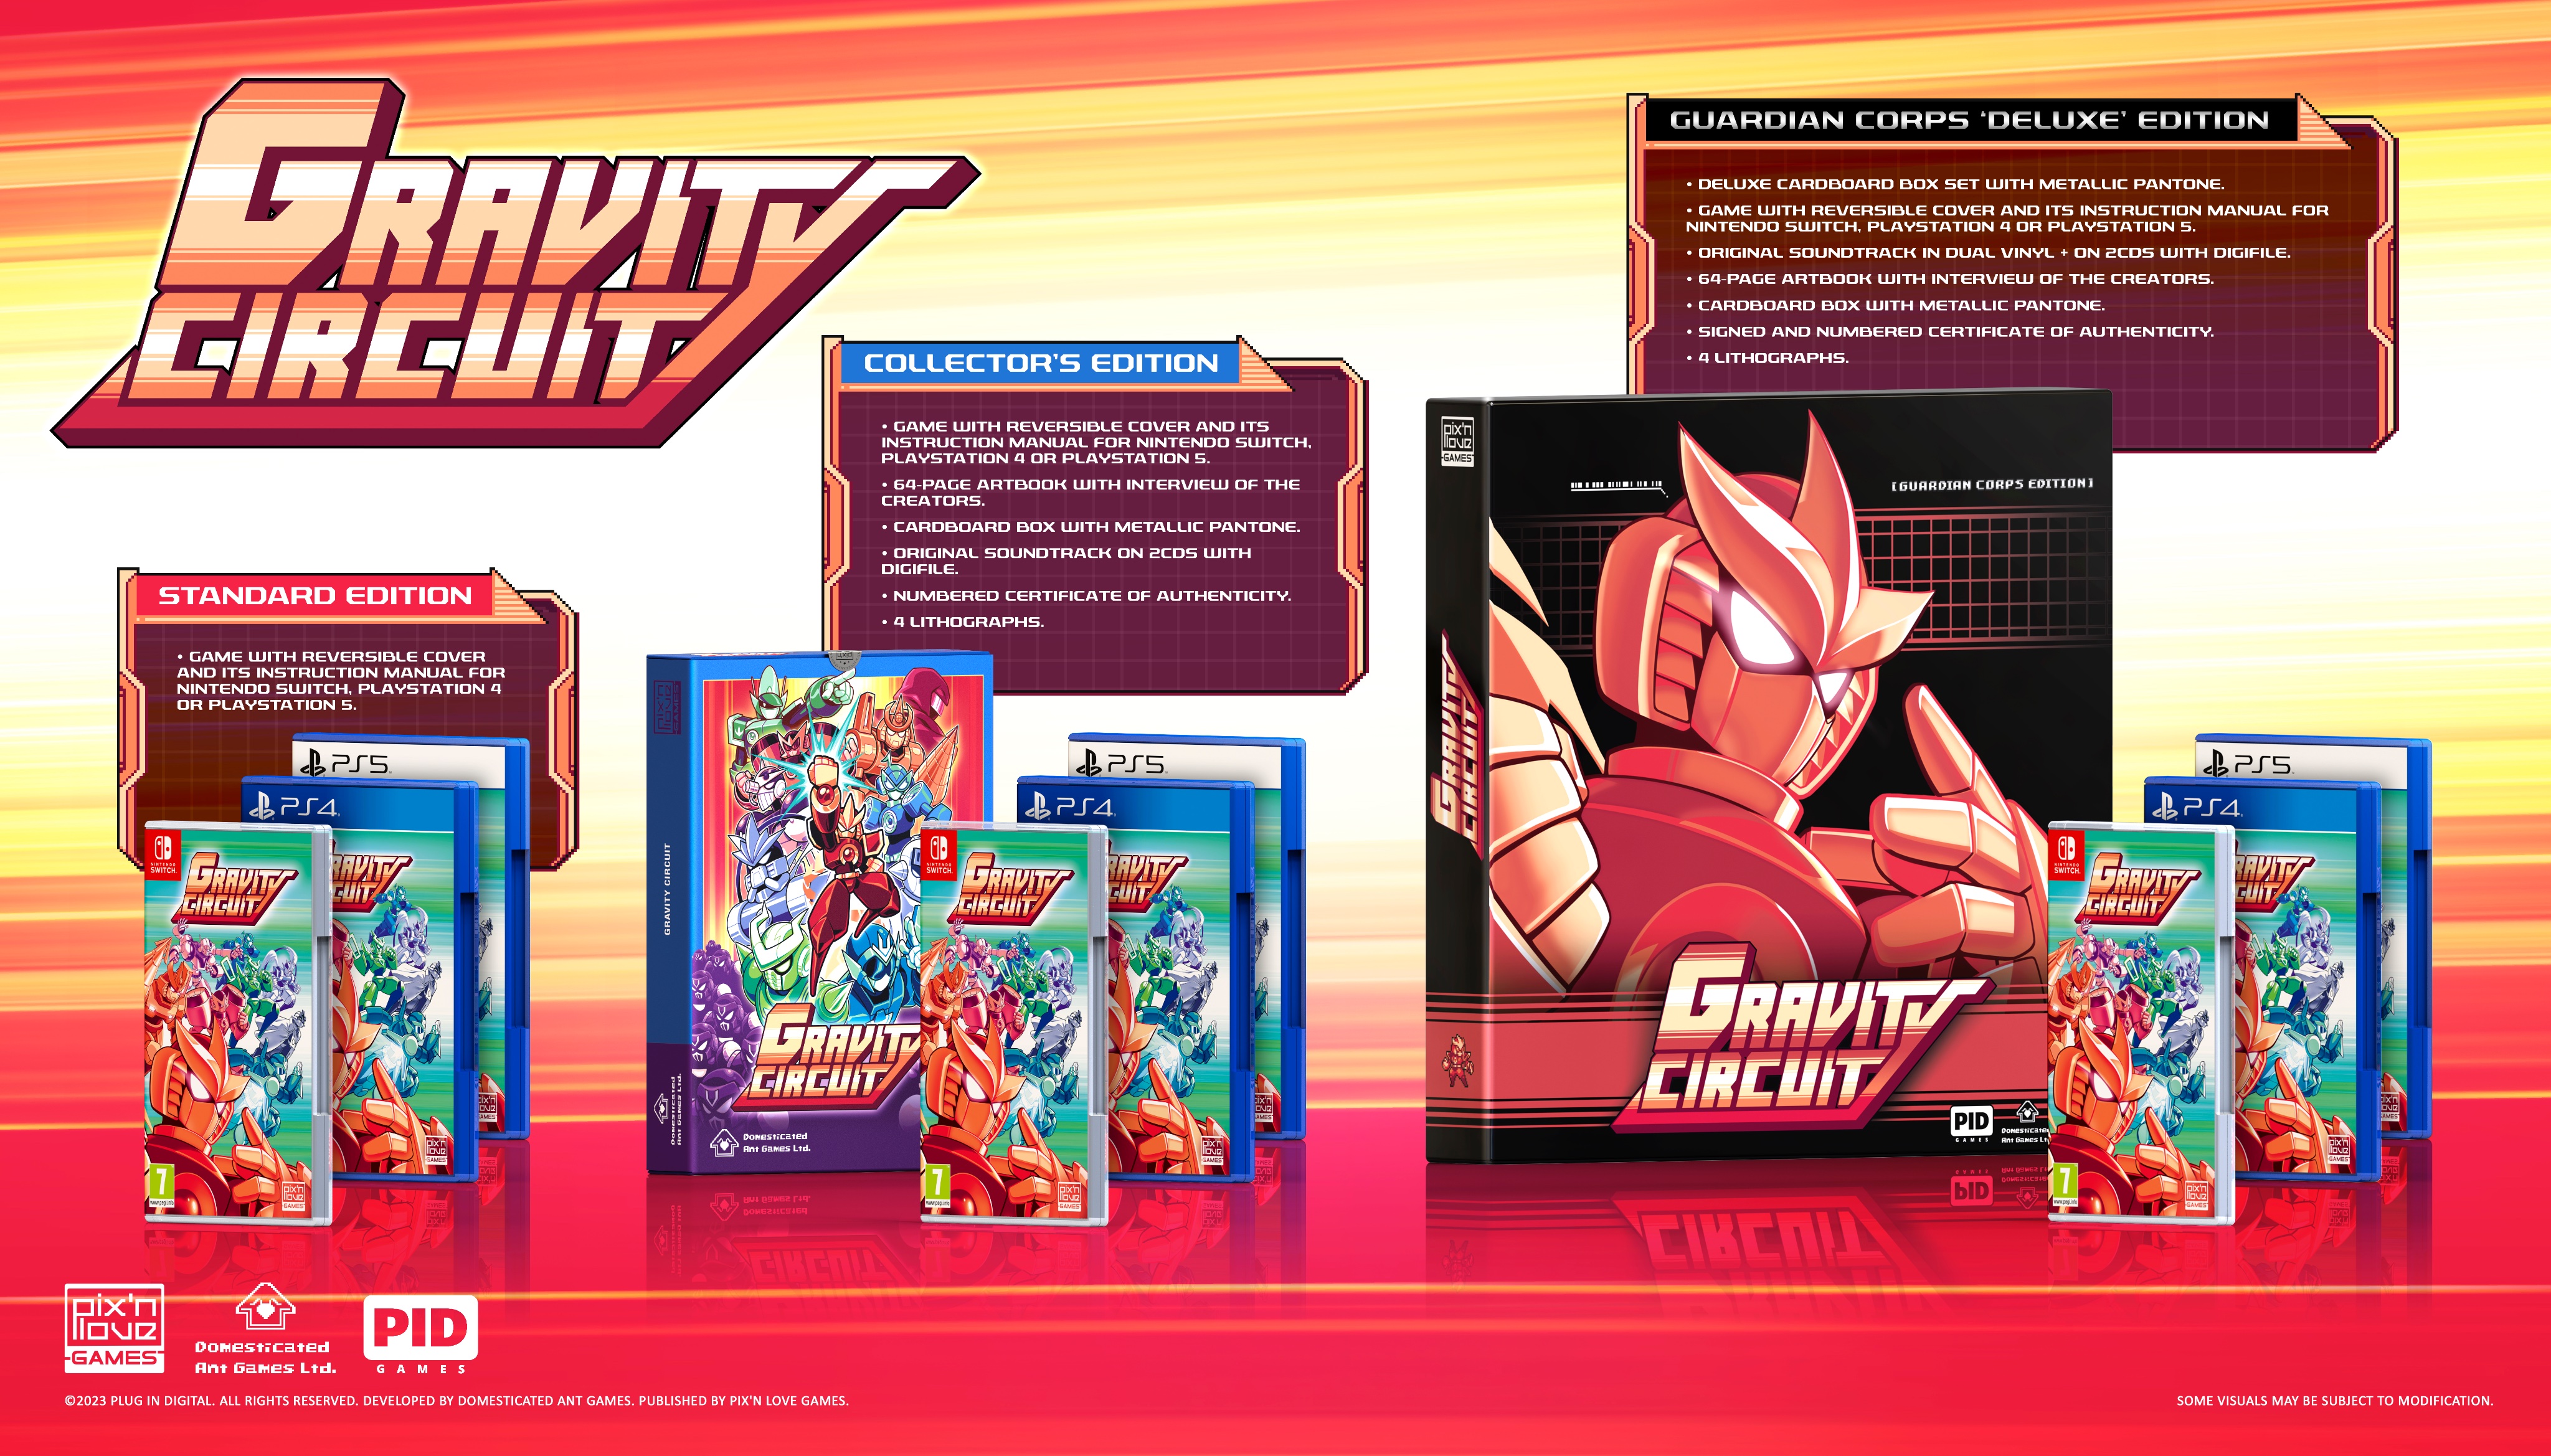 Gravity Circuit coming soon in physical edition! - Games Press